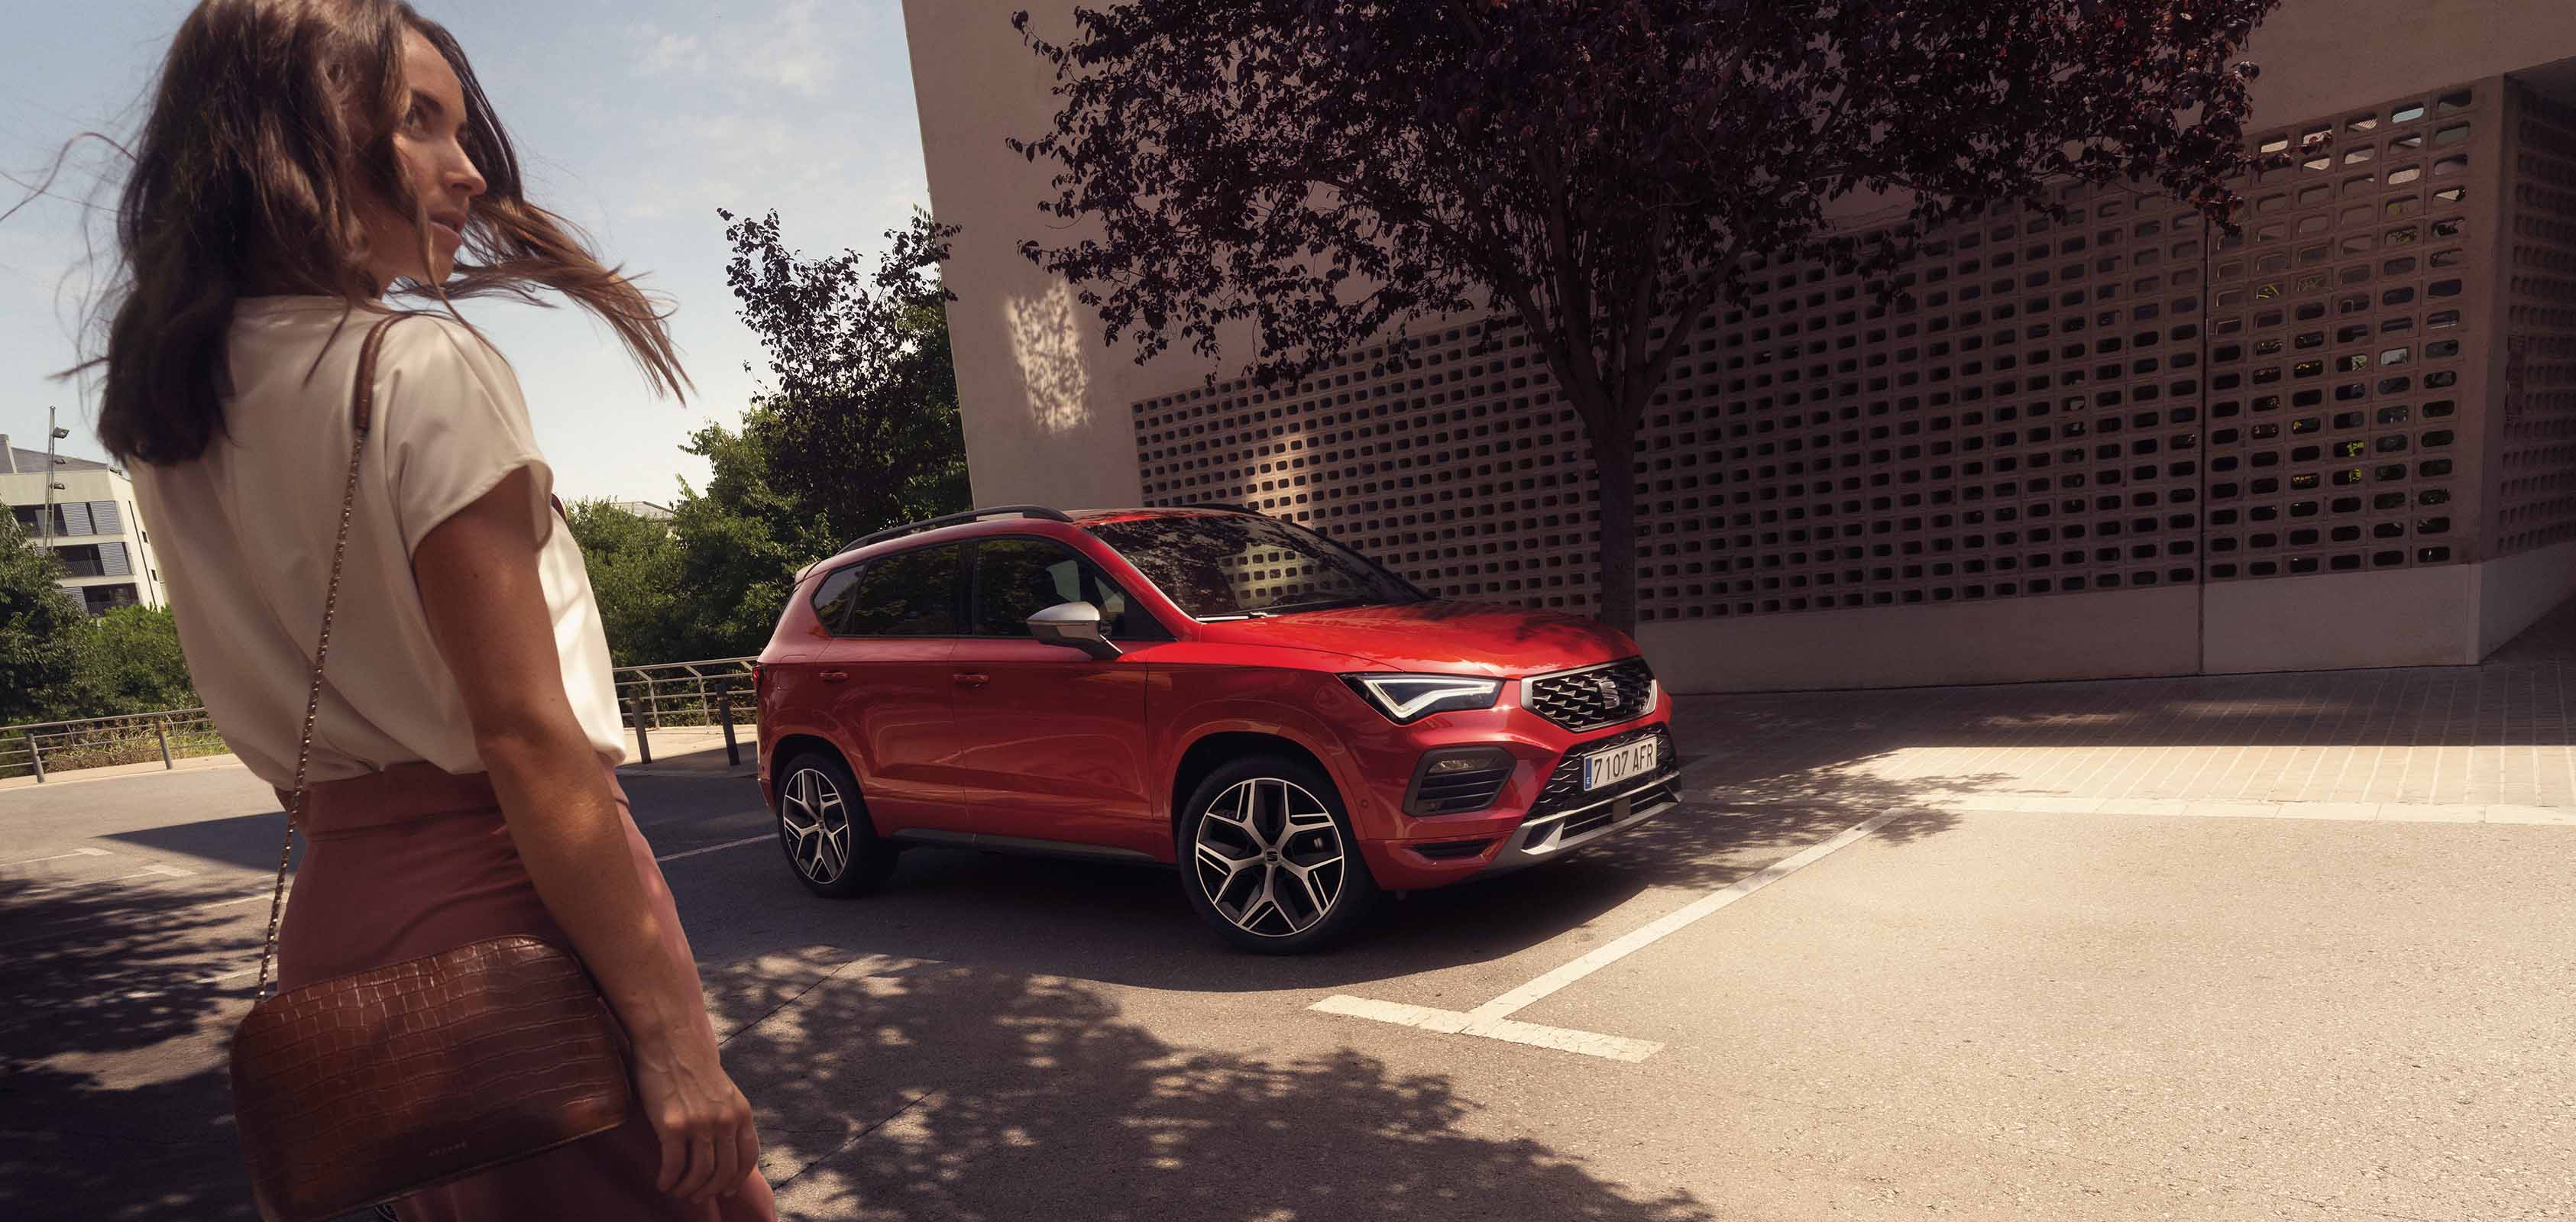 SEAT Ateca Xperience front view